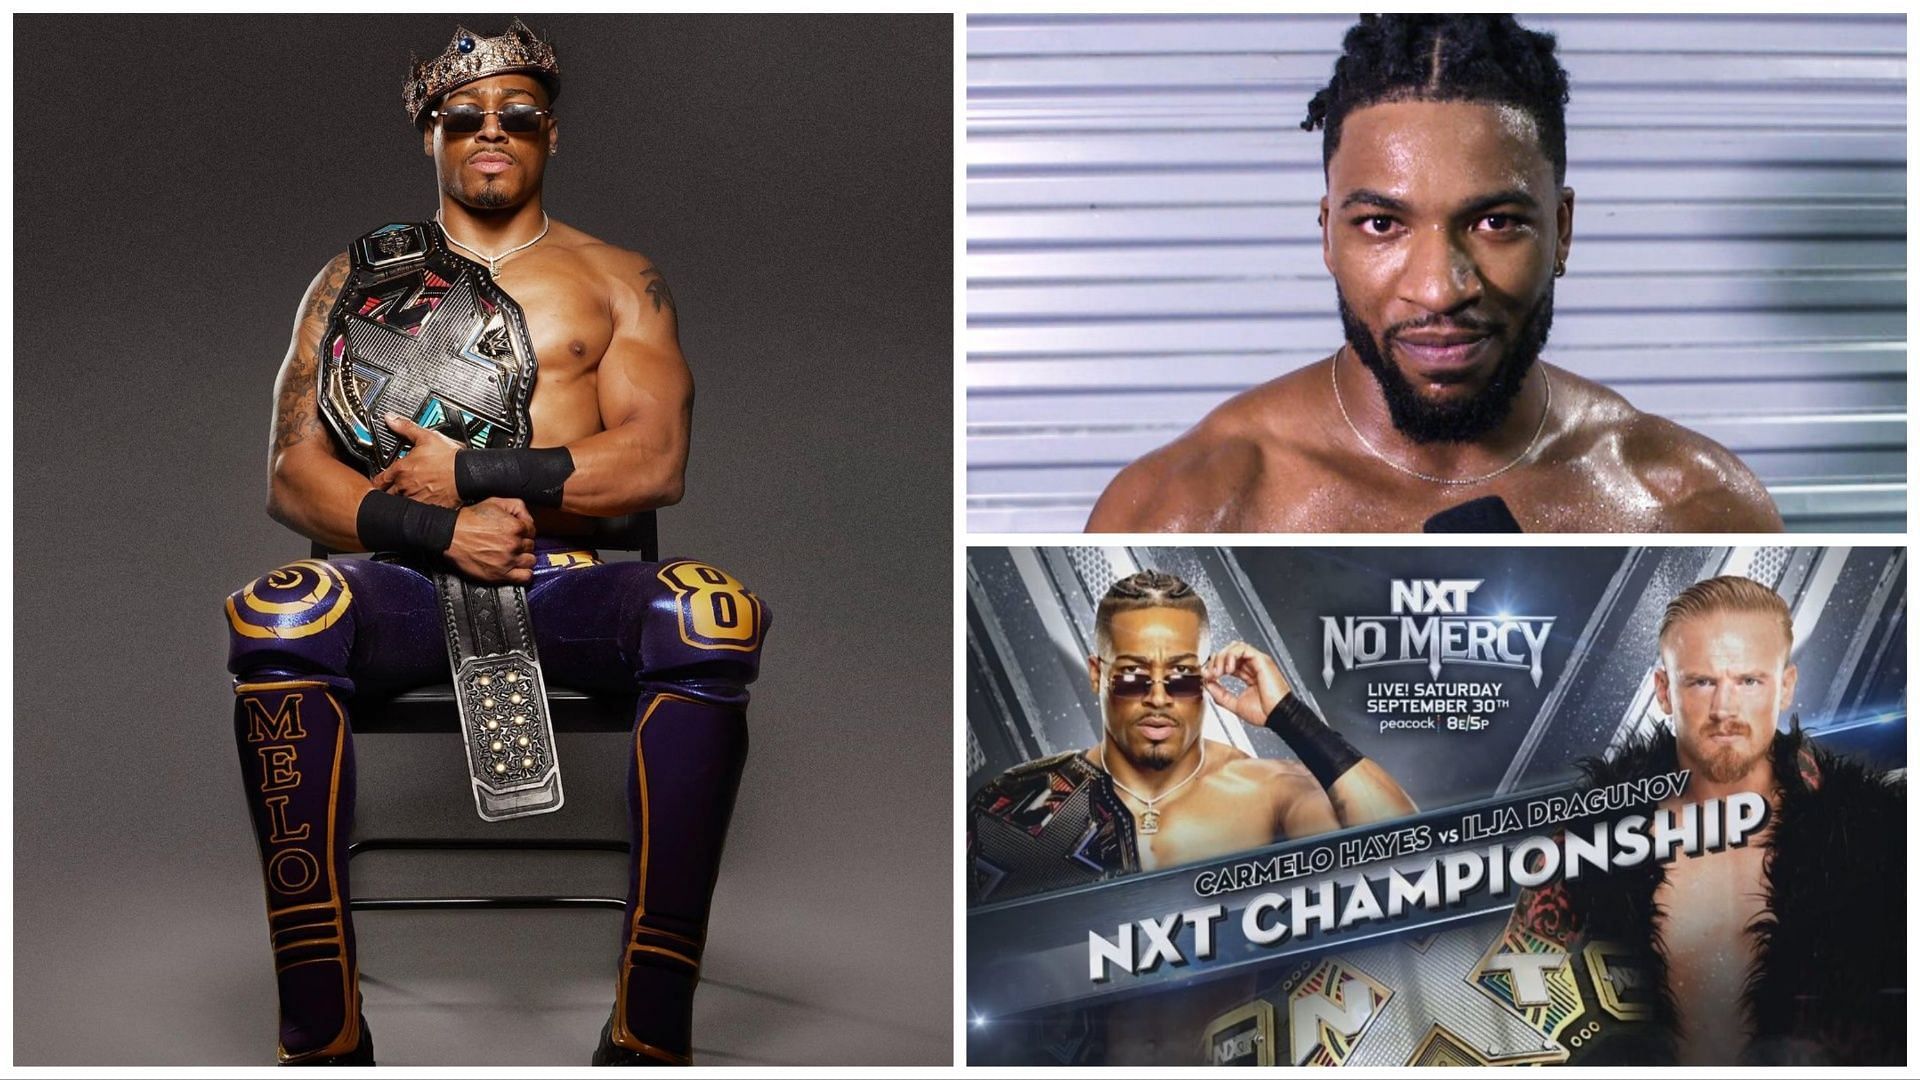 Who will defeat Carmelo Hayes for the WWE NXT Championship?